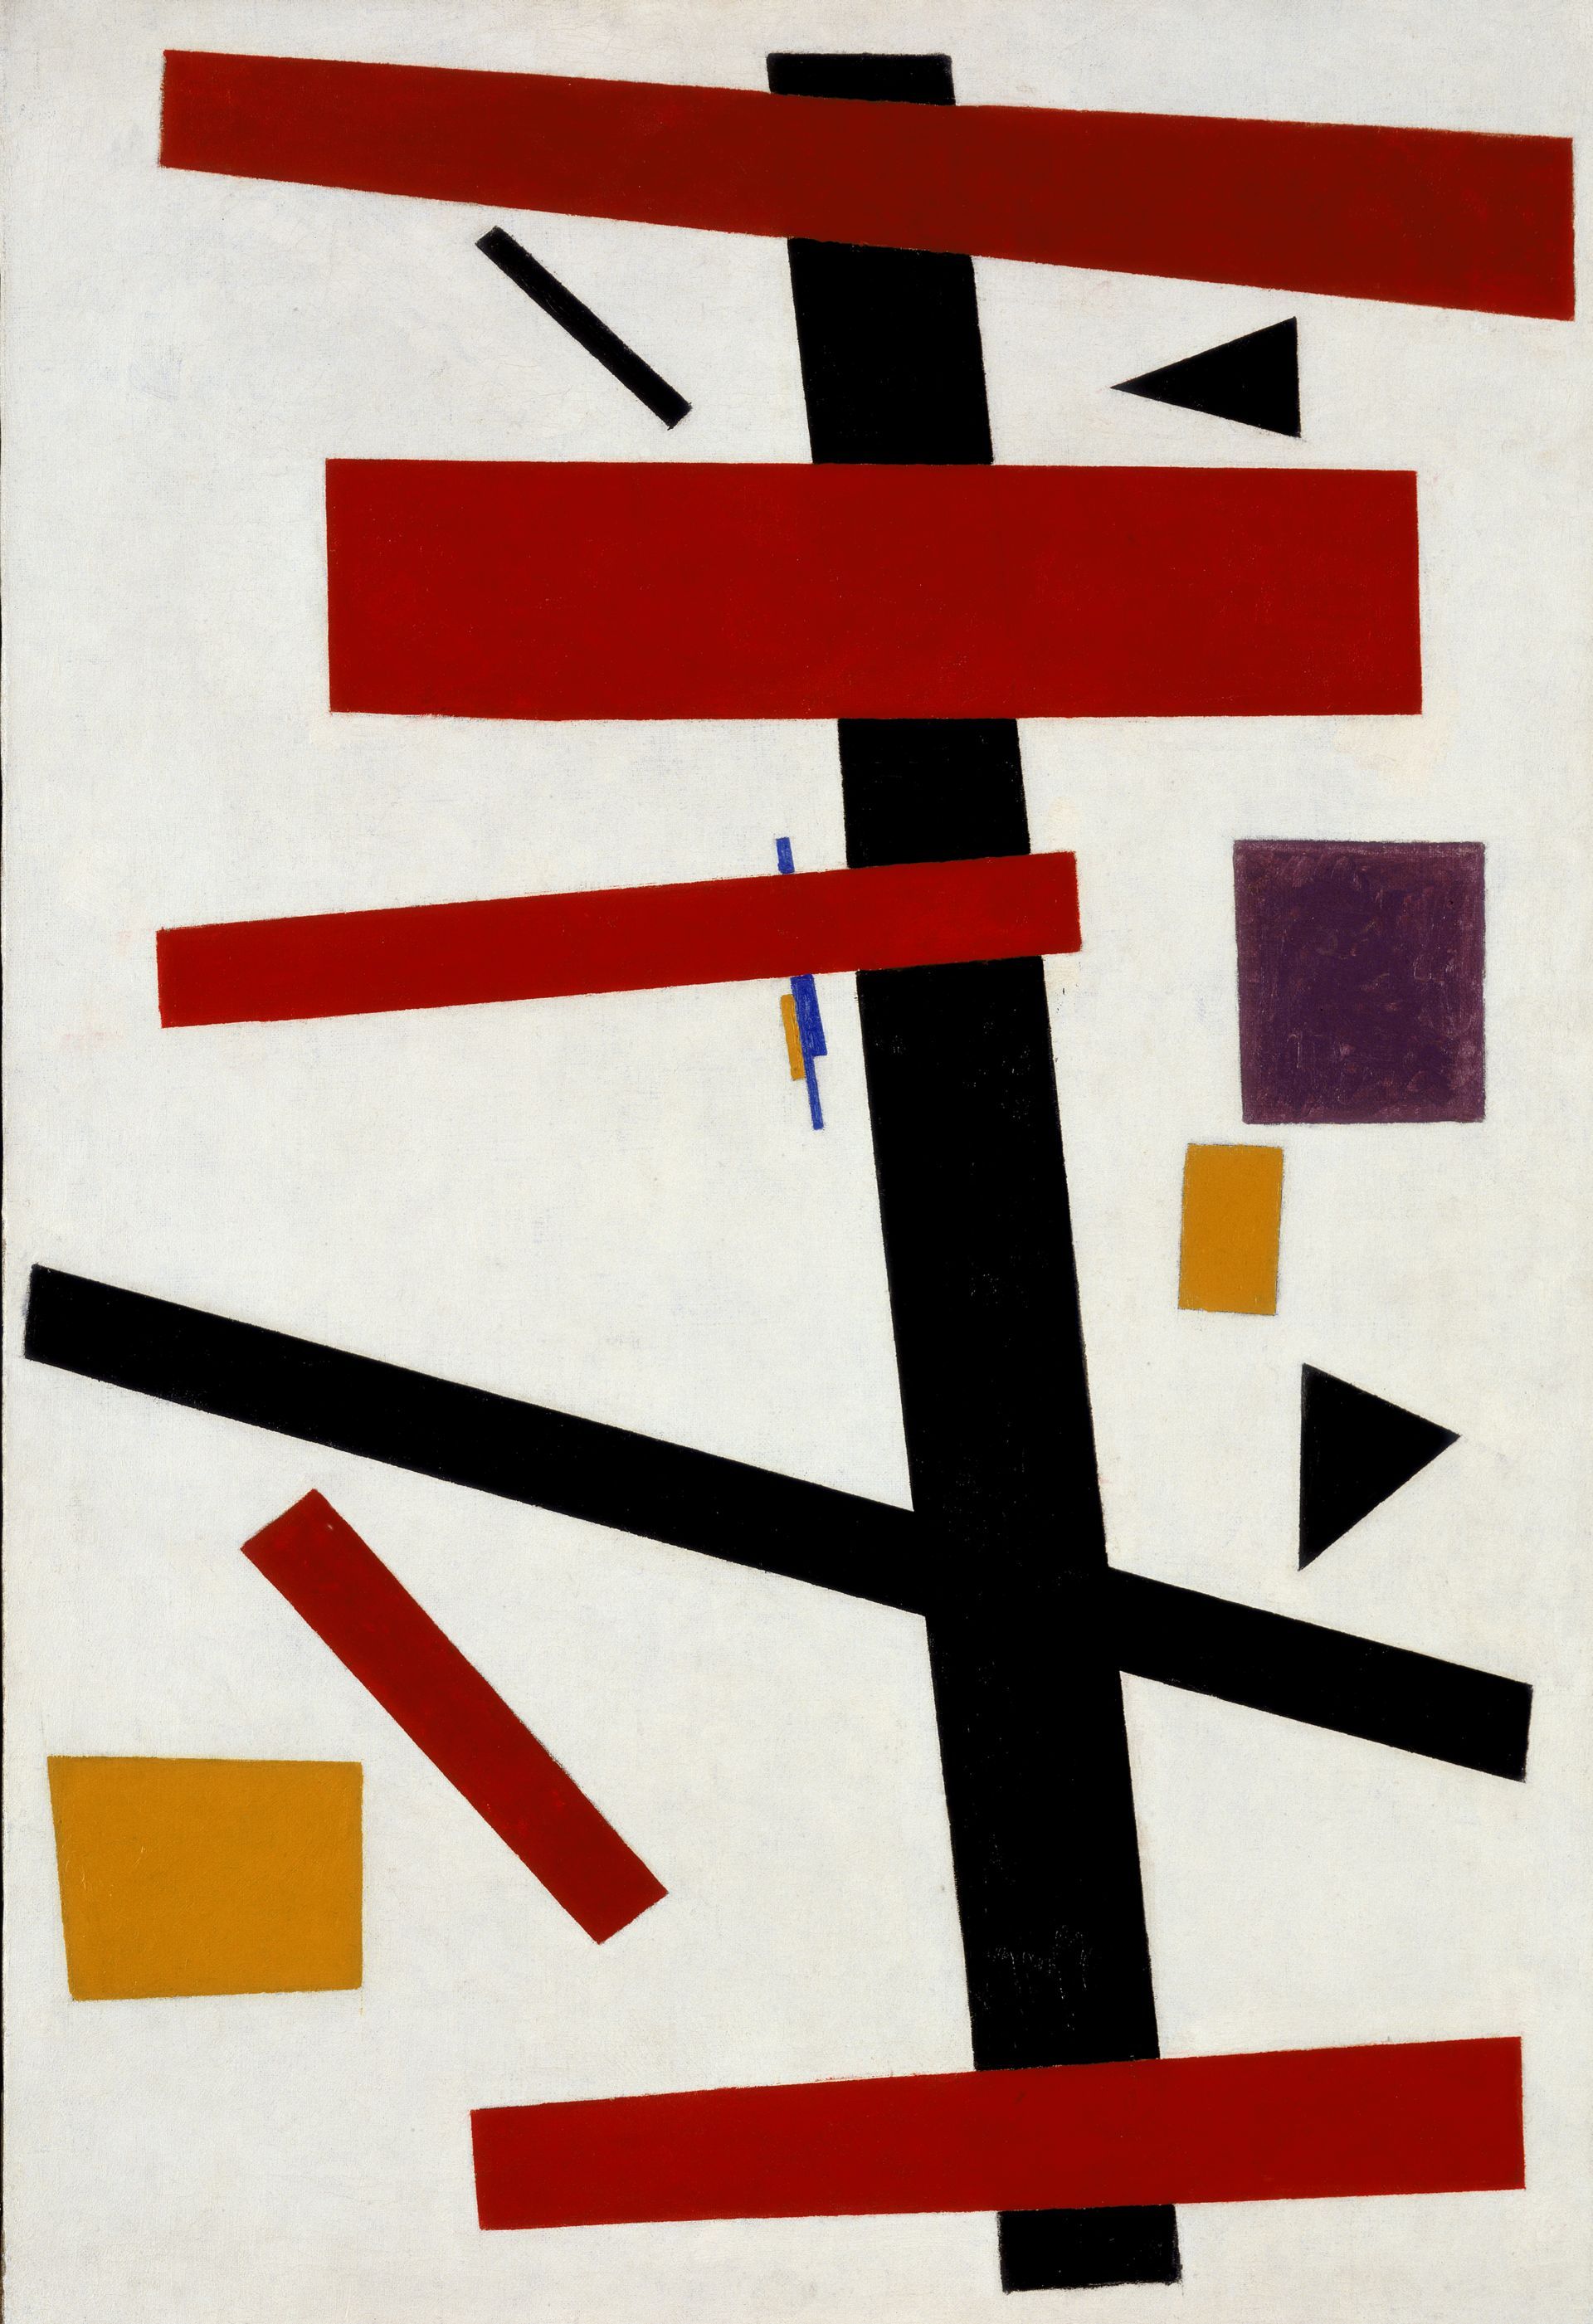 Kazimir Malevich's Supremus No. 50  (1915). The influential abstract painter was born in Ukraine when it was part of the Russian Empire, but until recently most museums described him as Russian

Courtesy Stedelijk Museum